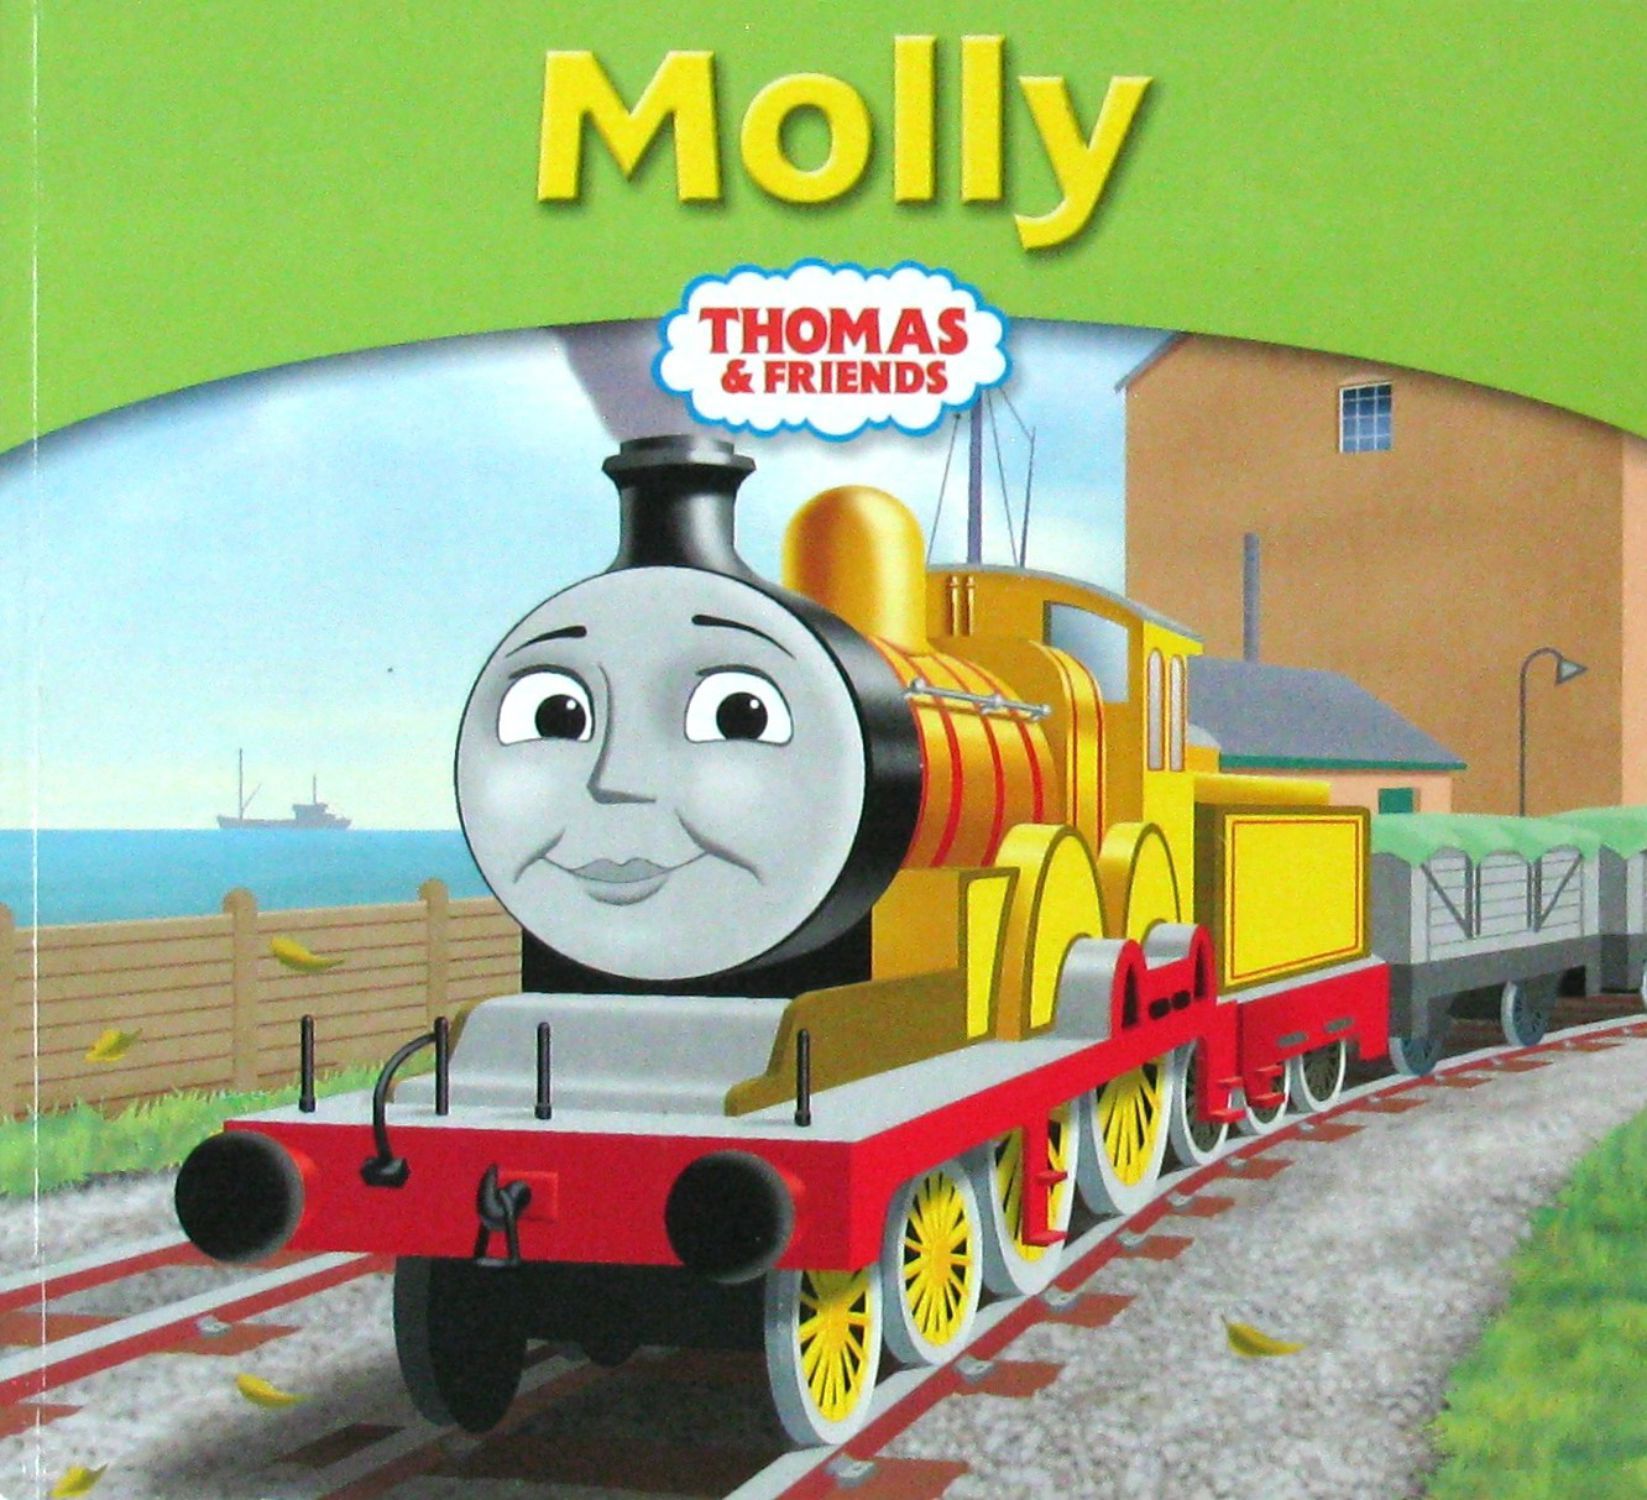 molly thomas and friends